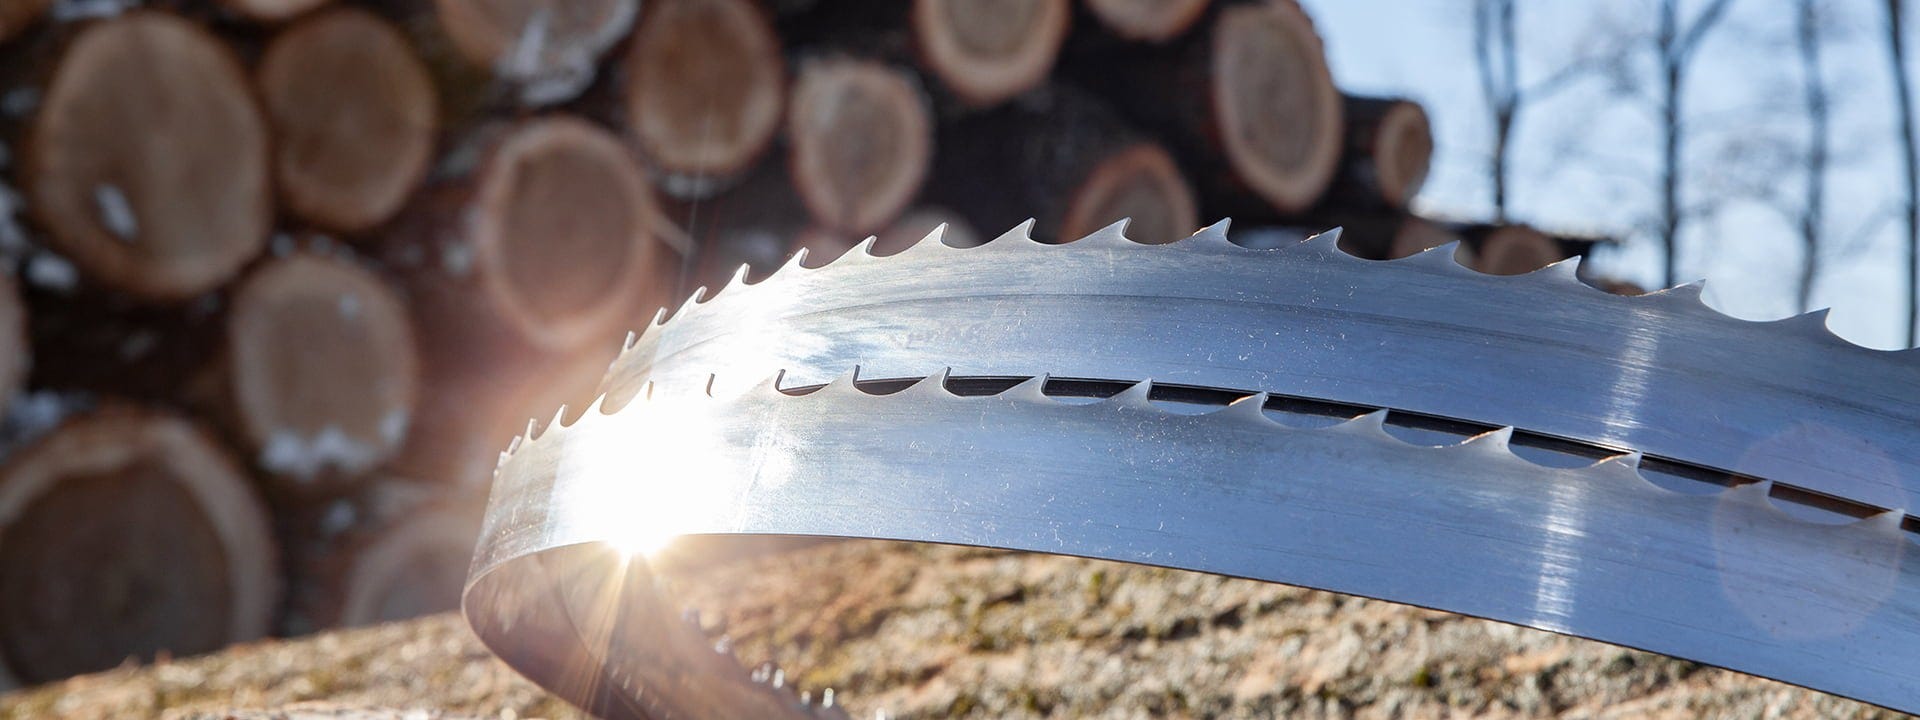 New Wood-Mizer system of marking bandsaw blades